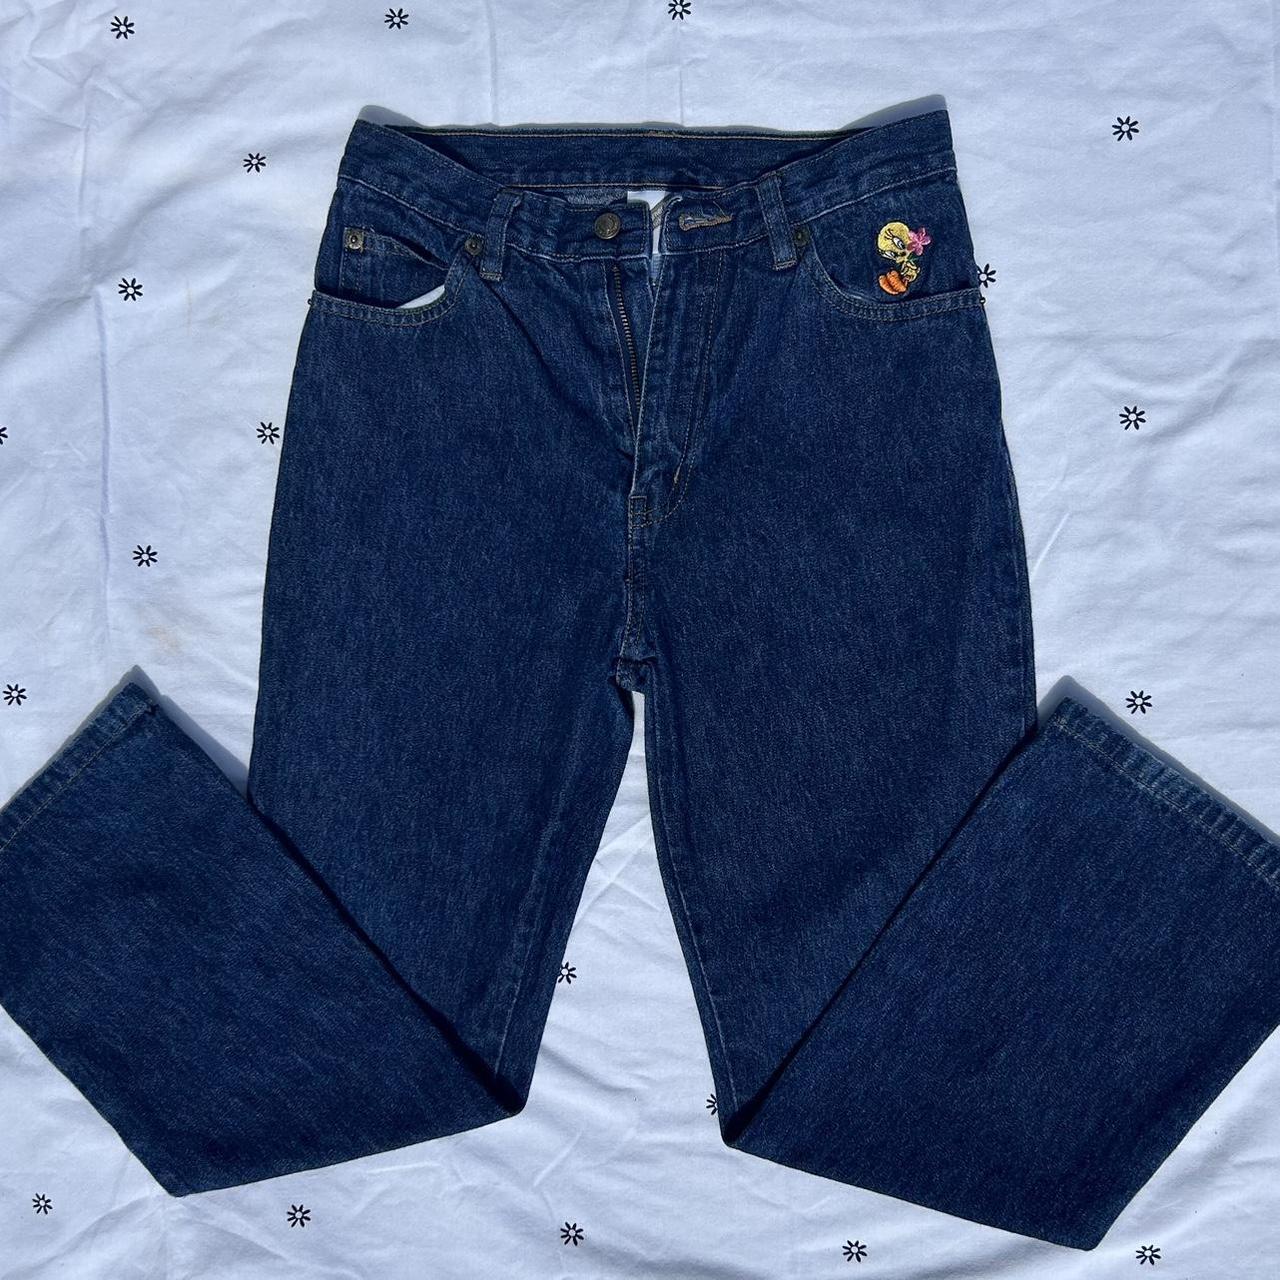 Warner Bros. Blue and Yellow Jeans | Depop